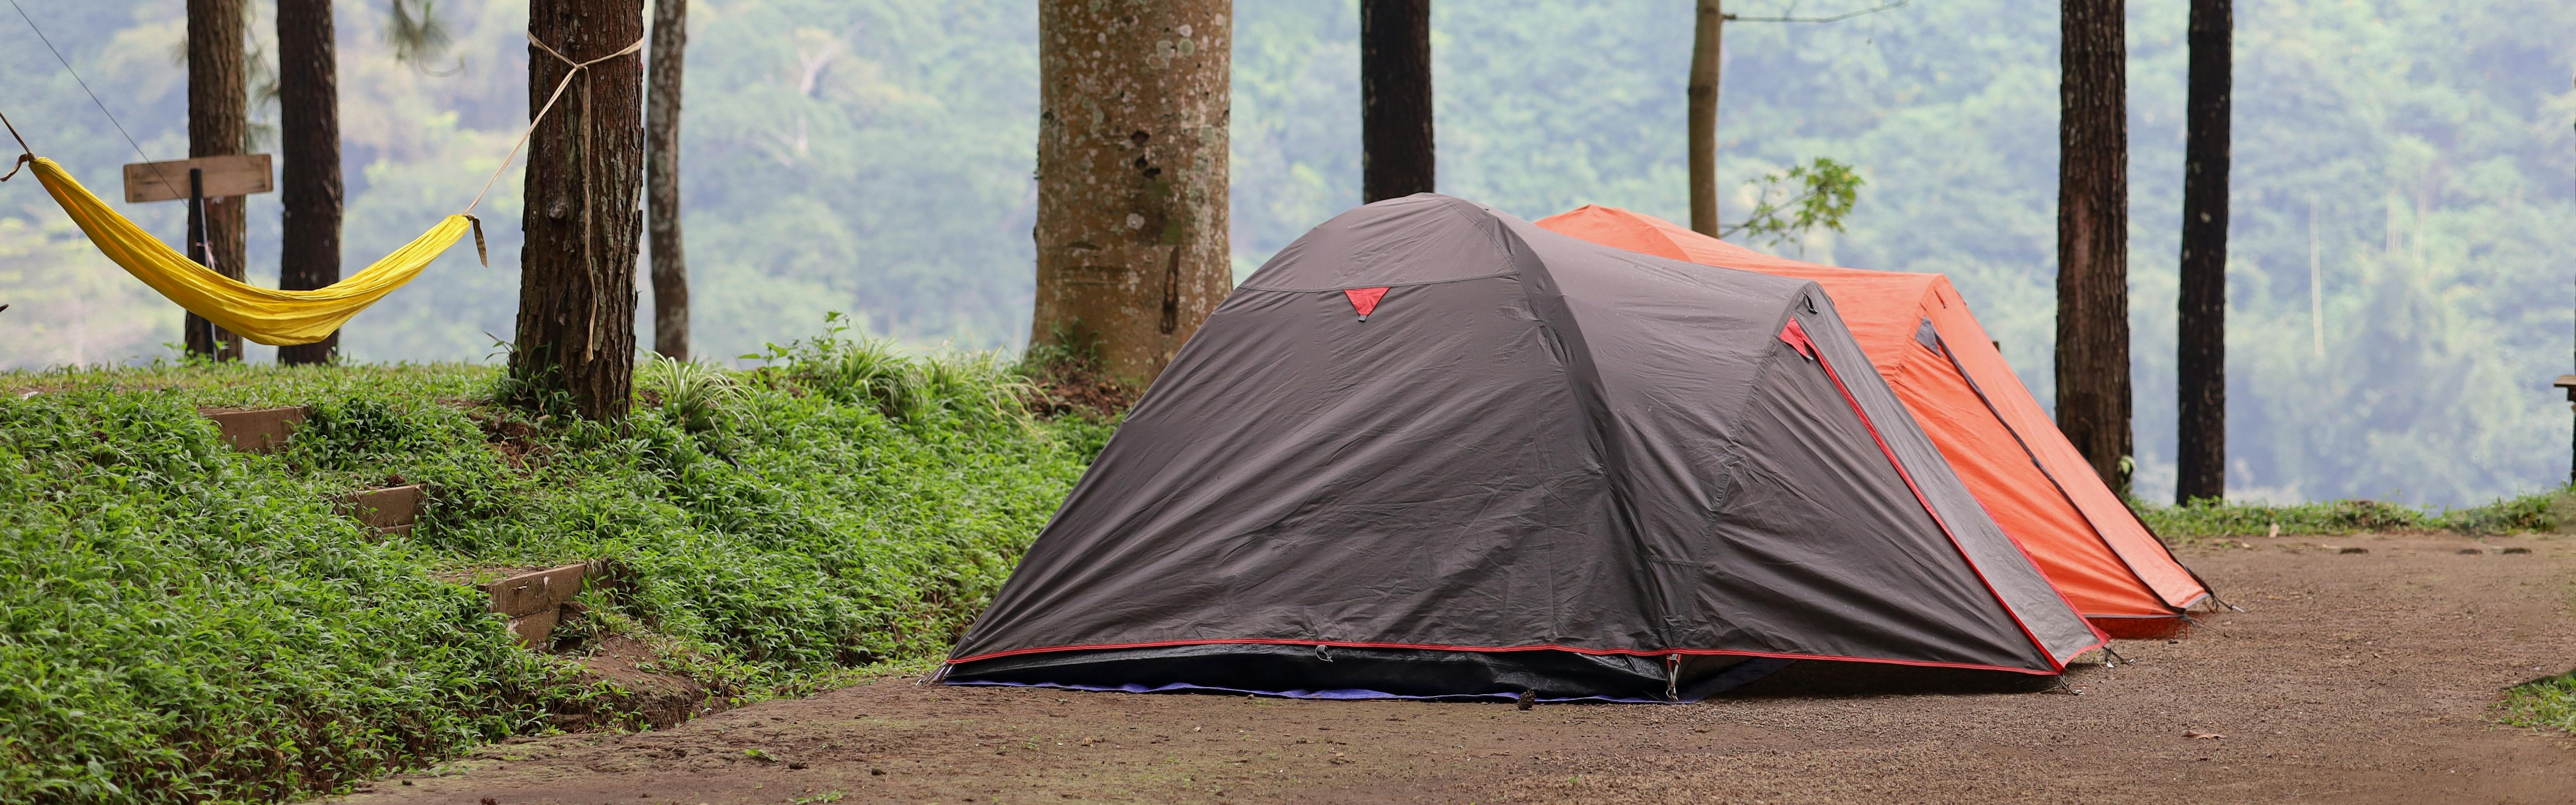 What Are the Different Types of Tents?